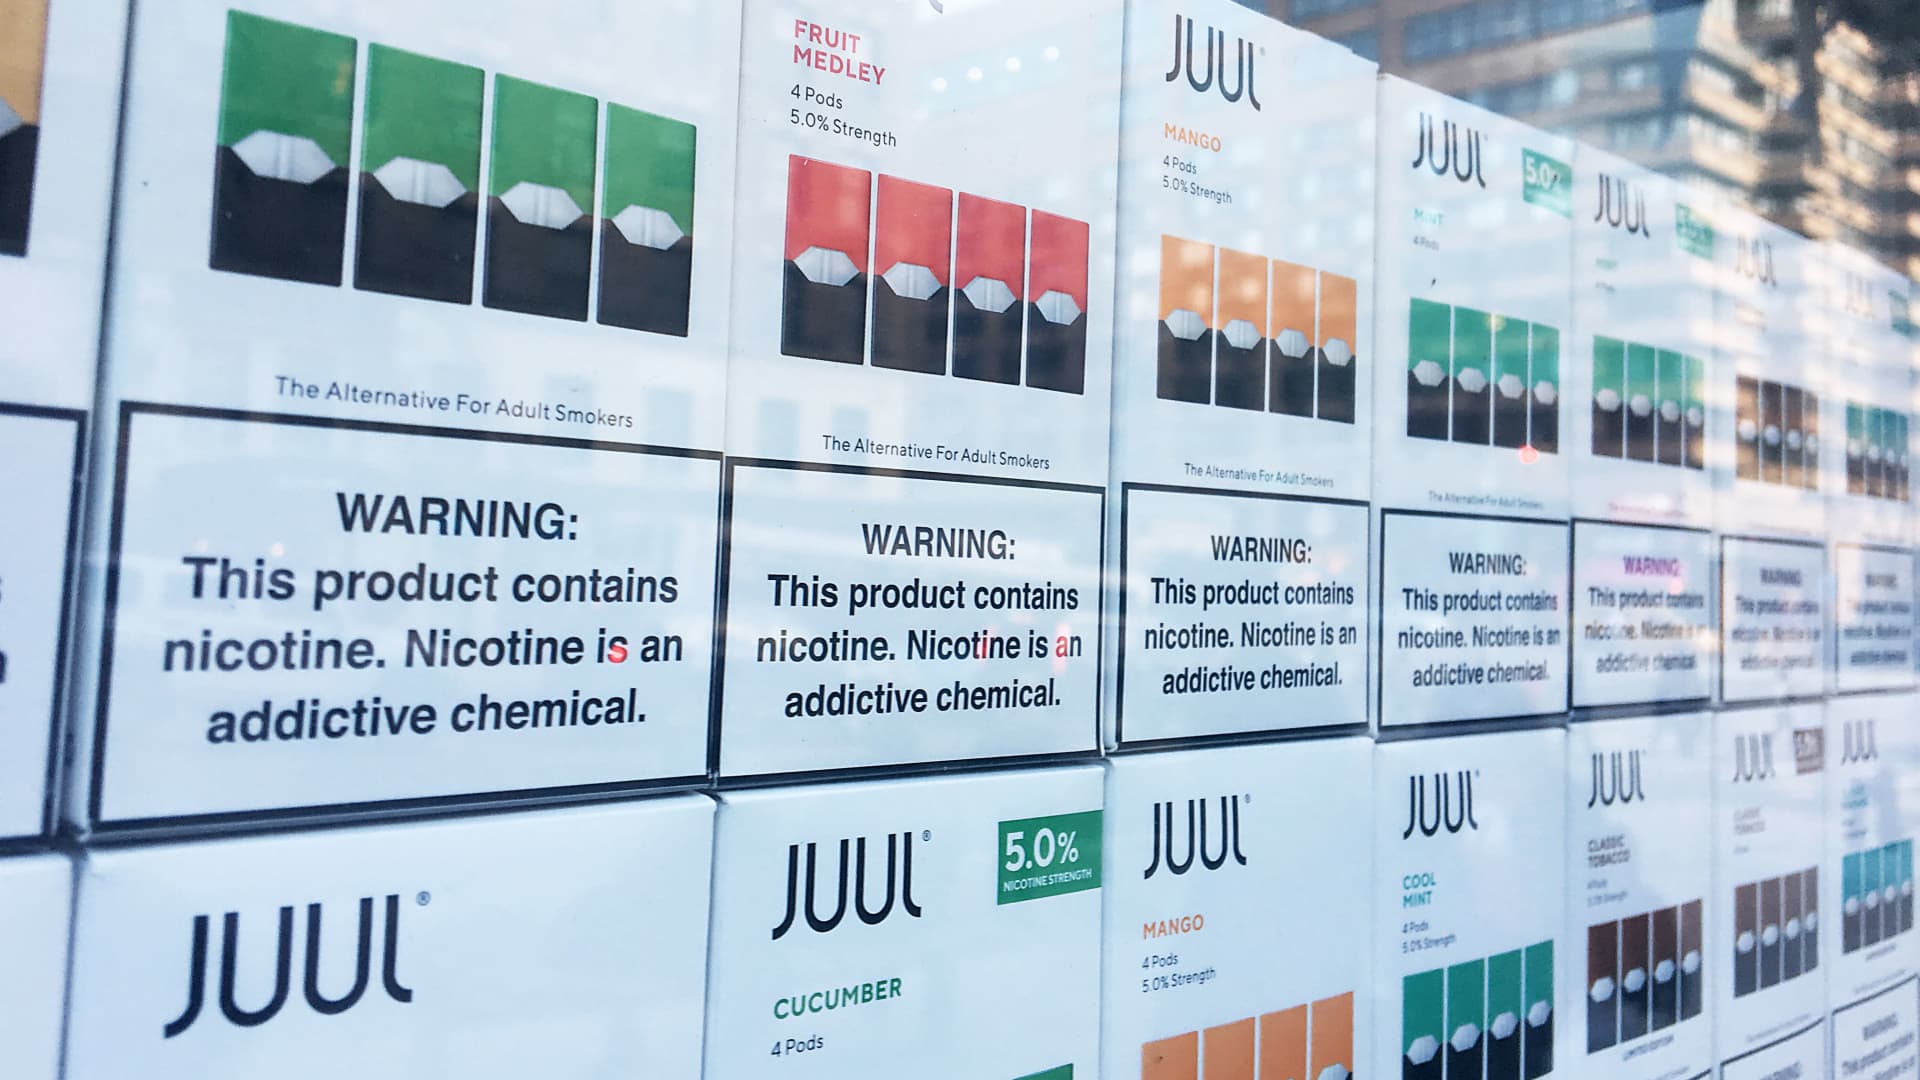 Juul plans to cut about 500 jobs by the end of the year